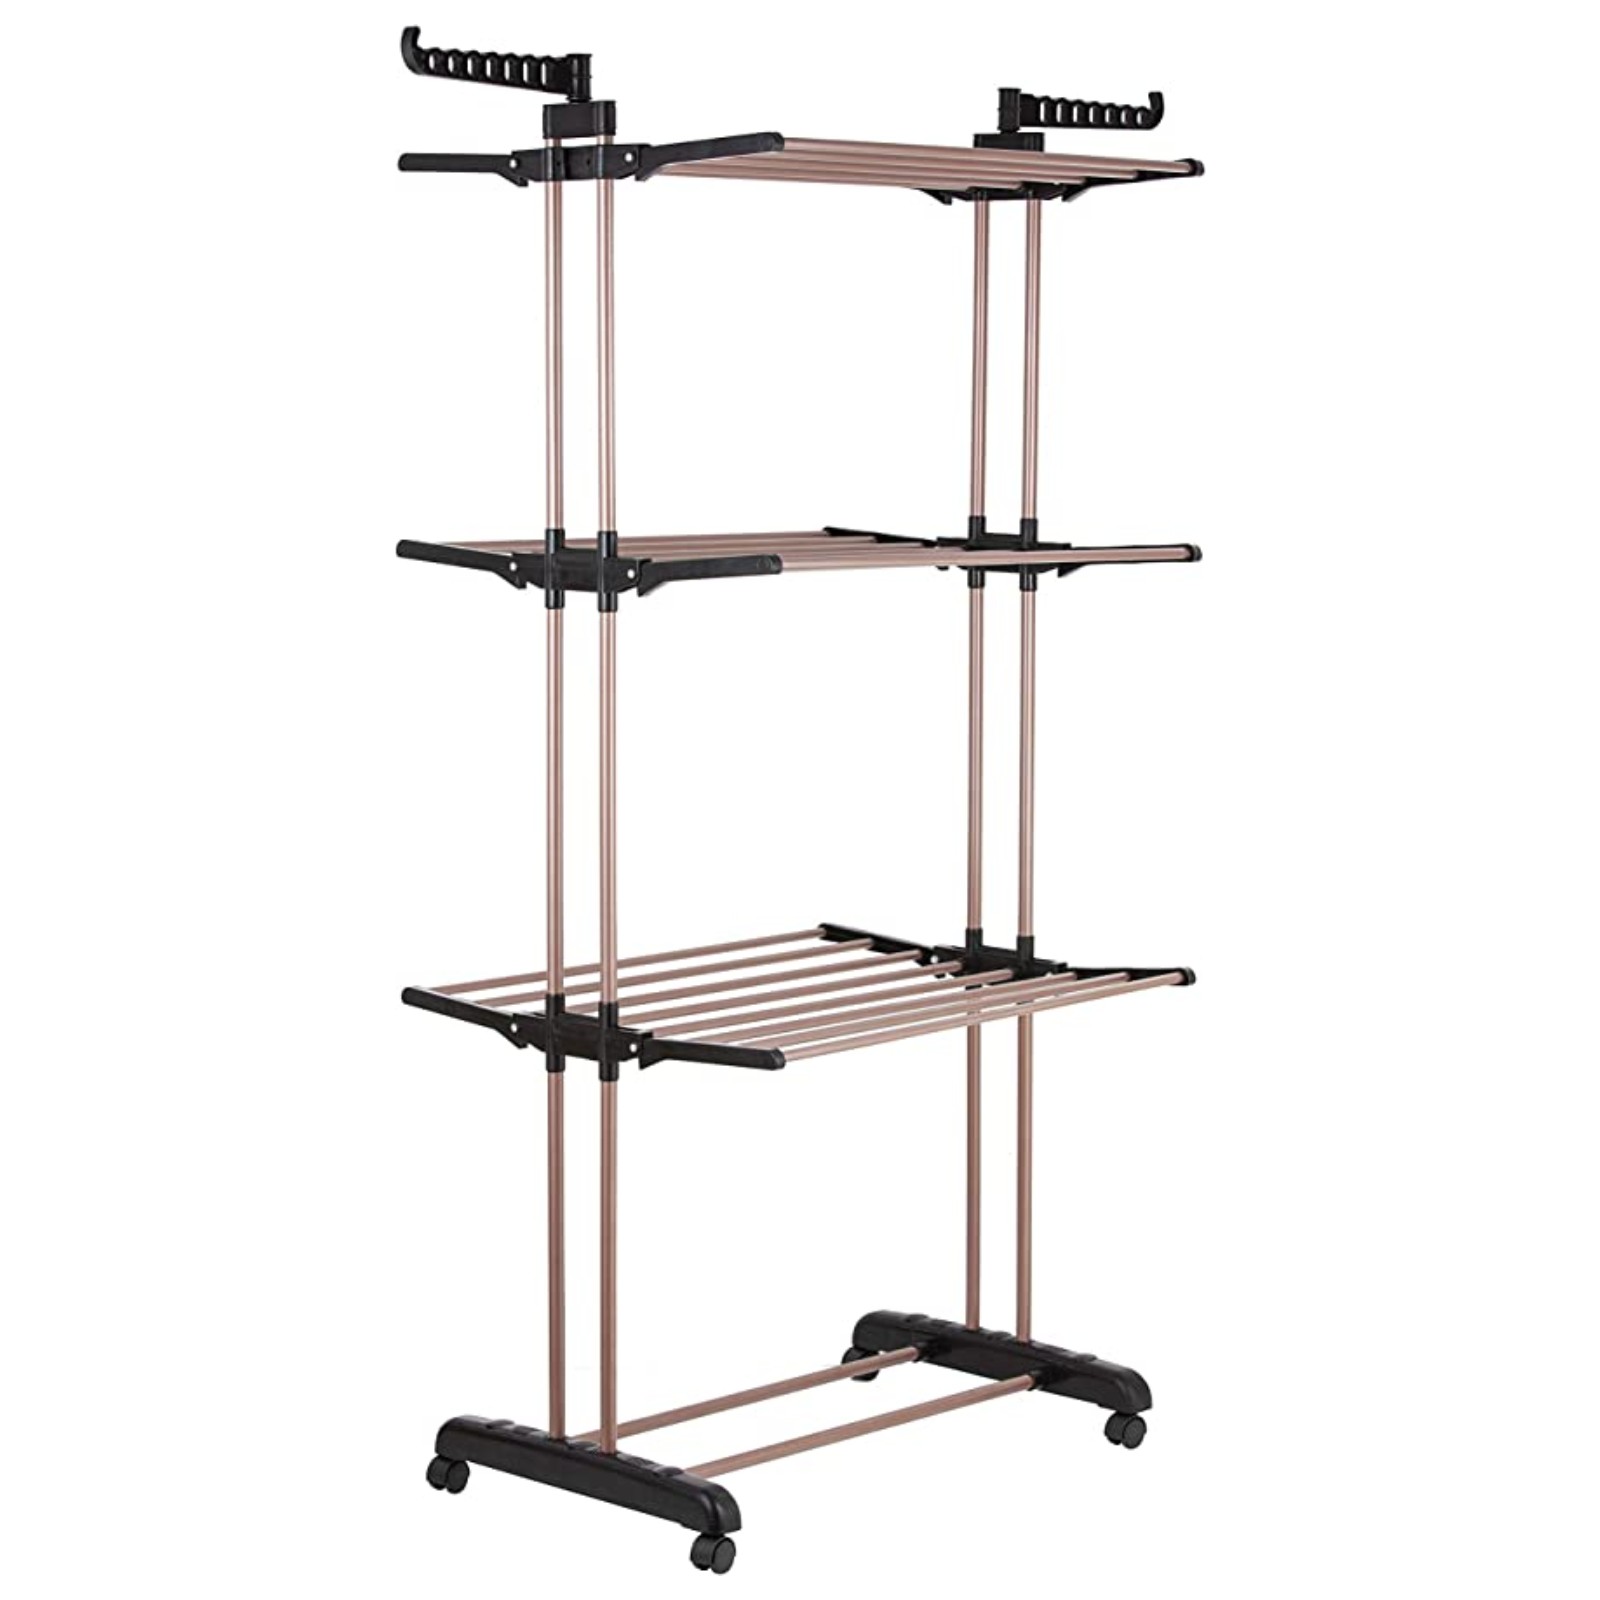 Black and rose gold clothes airer.